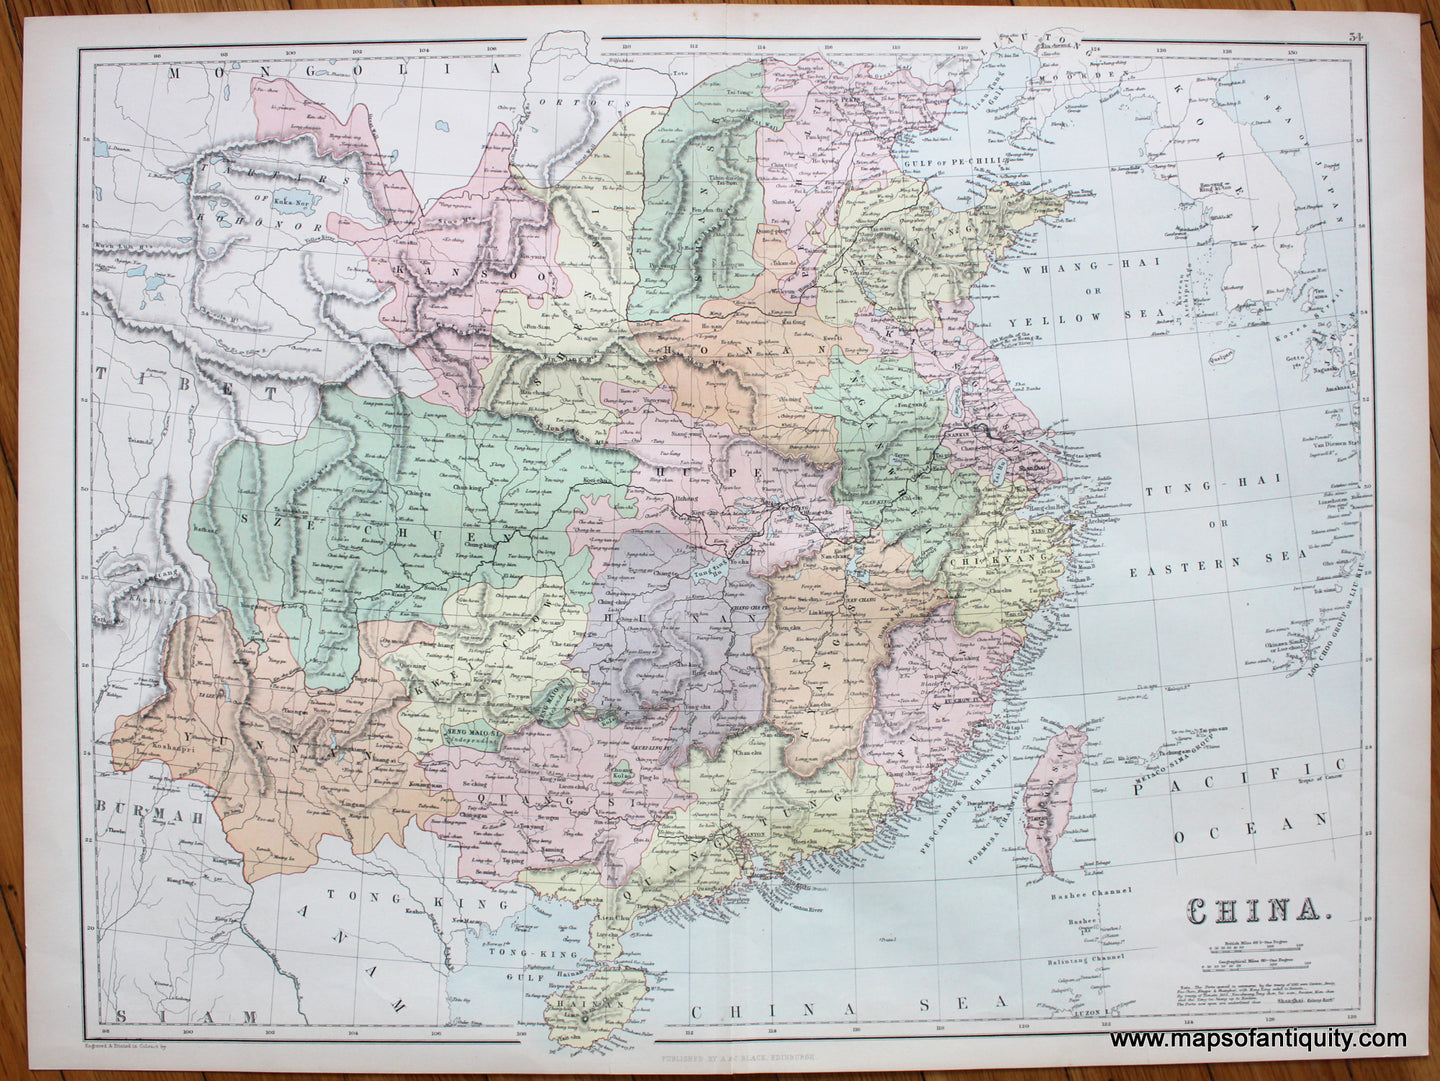 Antique-Printed-Color-Map-China.-******-Asia-China-&-Japan-1879-Black-Maps-Of-Antiquity